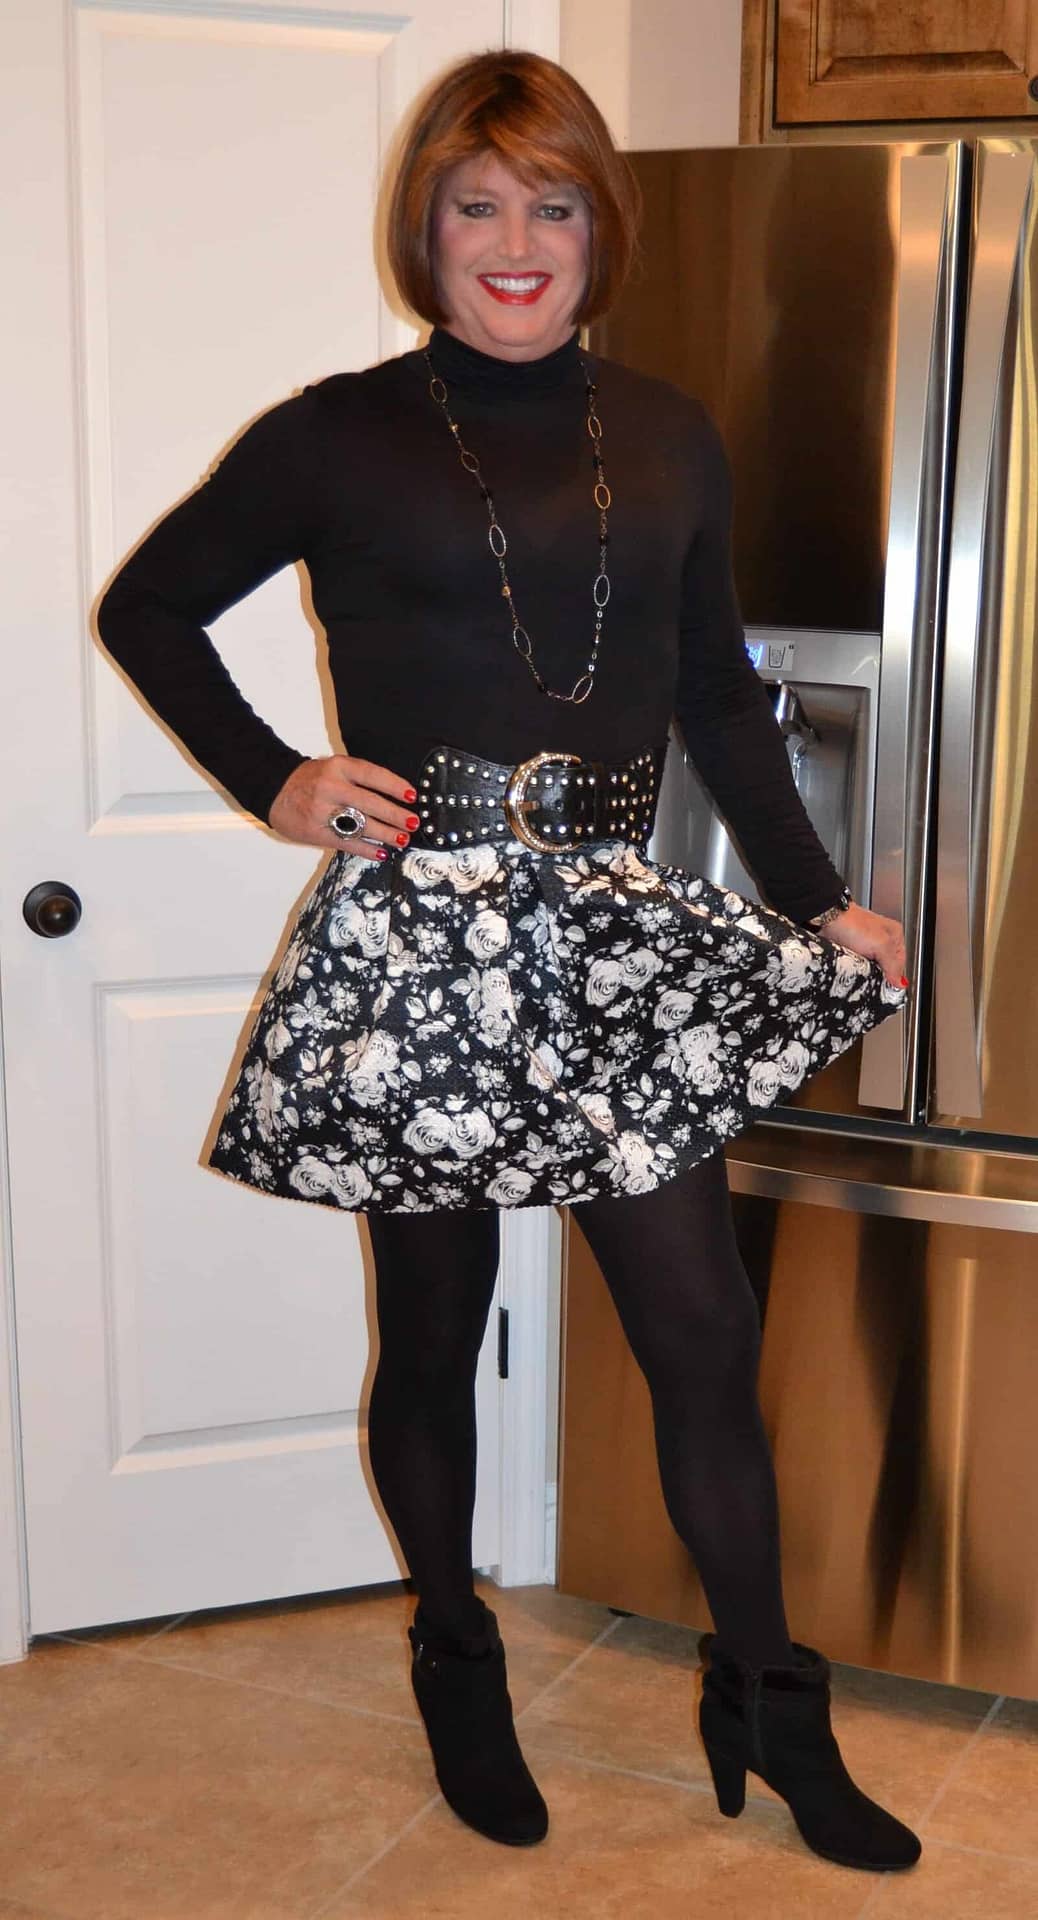 Poofy Skirts And Suede Ankle Booties Is Where It’s At! – Crossdresser ...